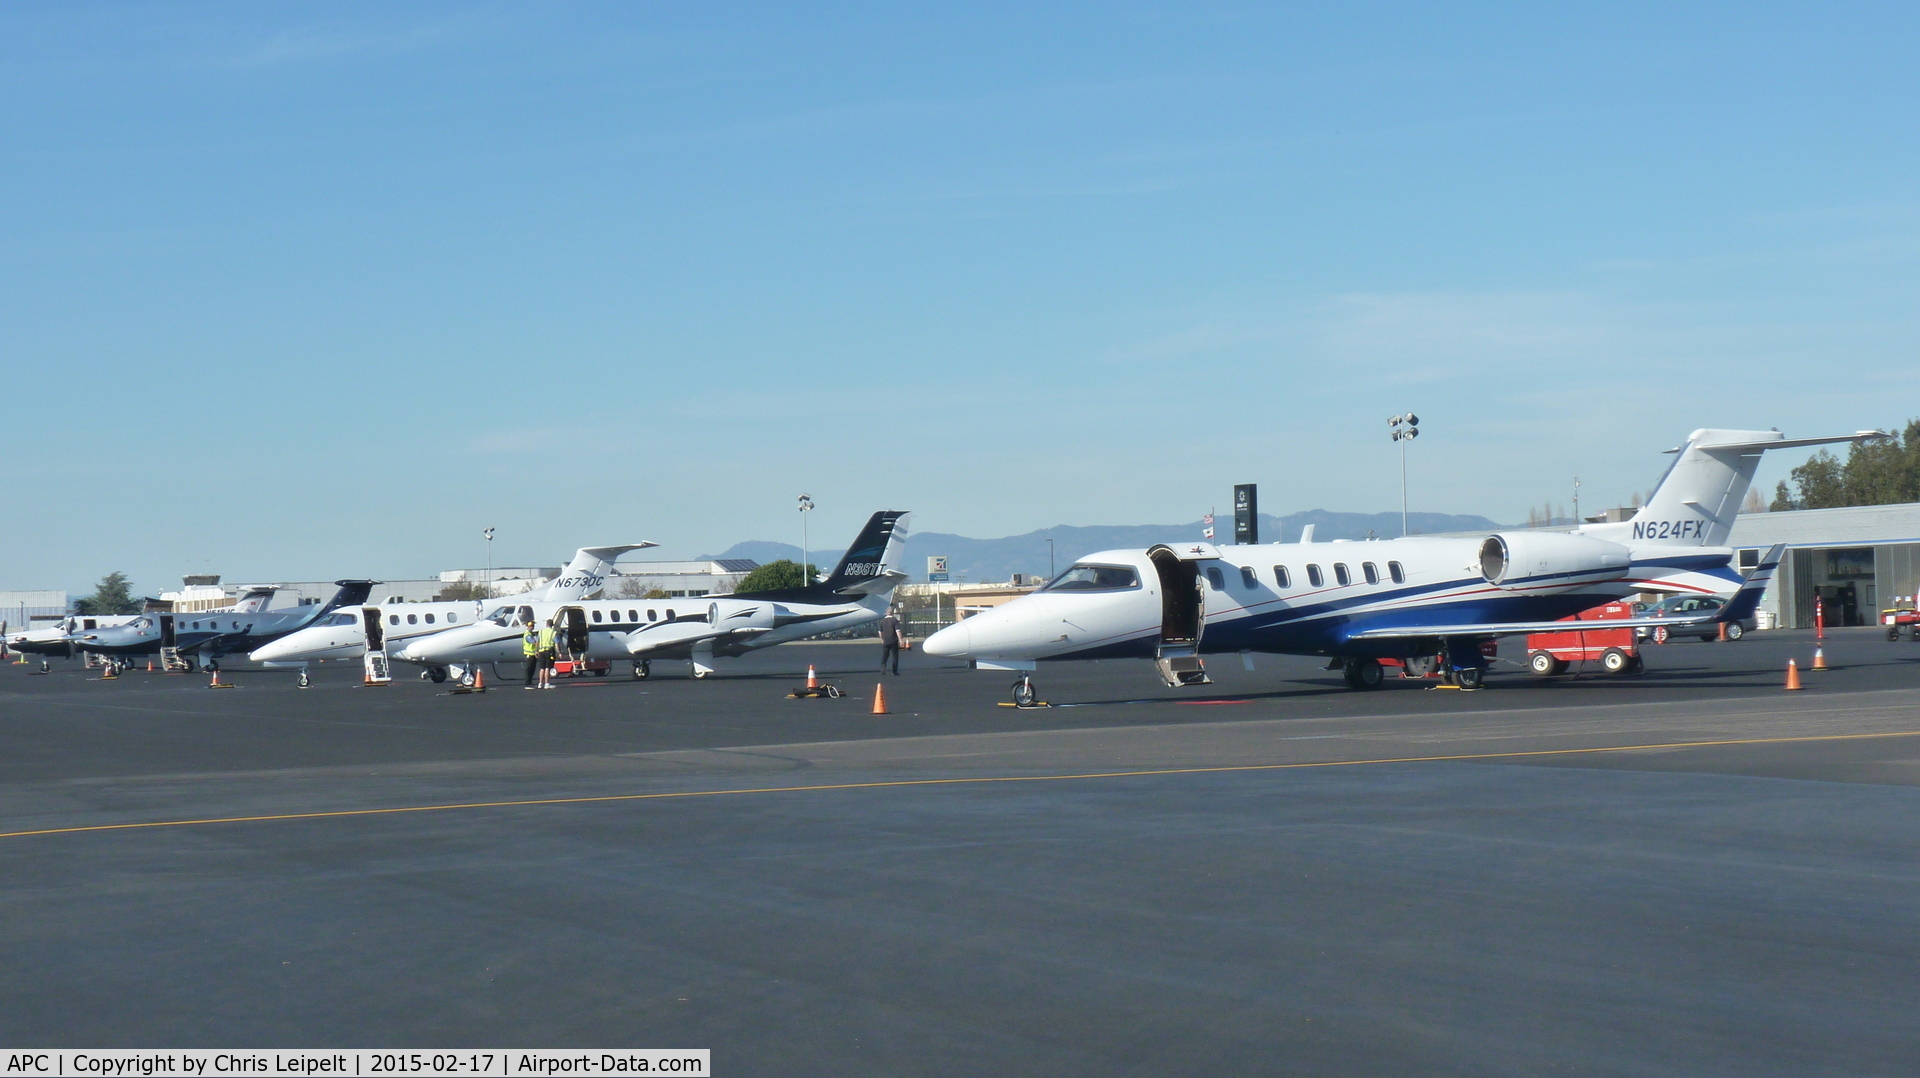 Napa County Airport (APC) - The Napa Jet Center with LearJets, Citations, PC-12s, and Phenoms.